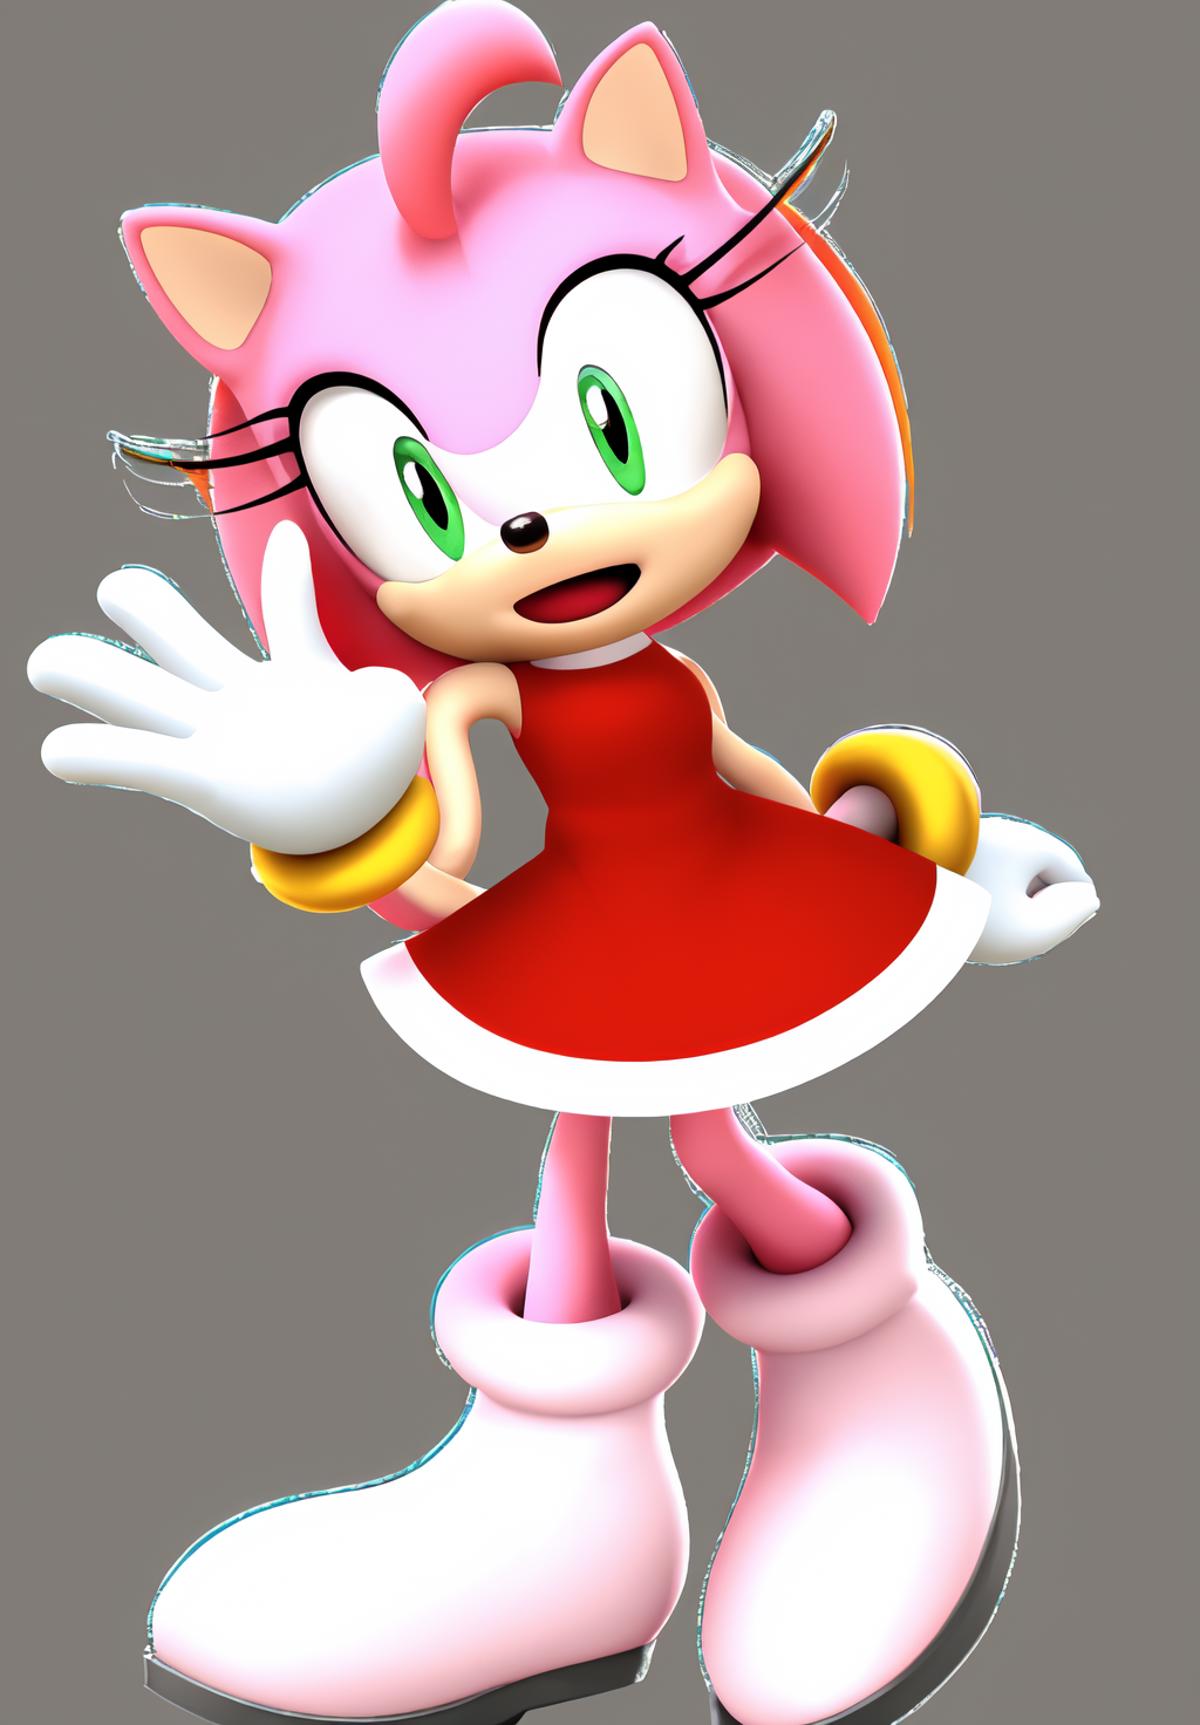 Amy Rose - Sonic the Hedgehog image by AsaTyr